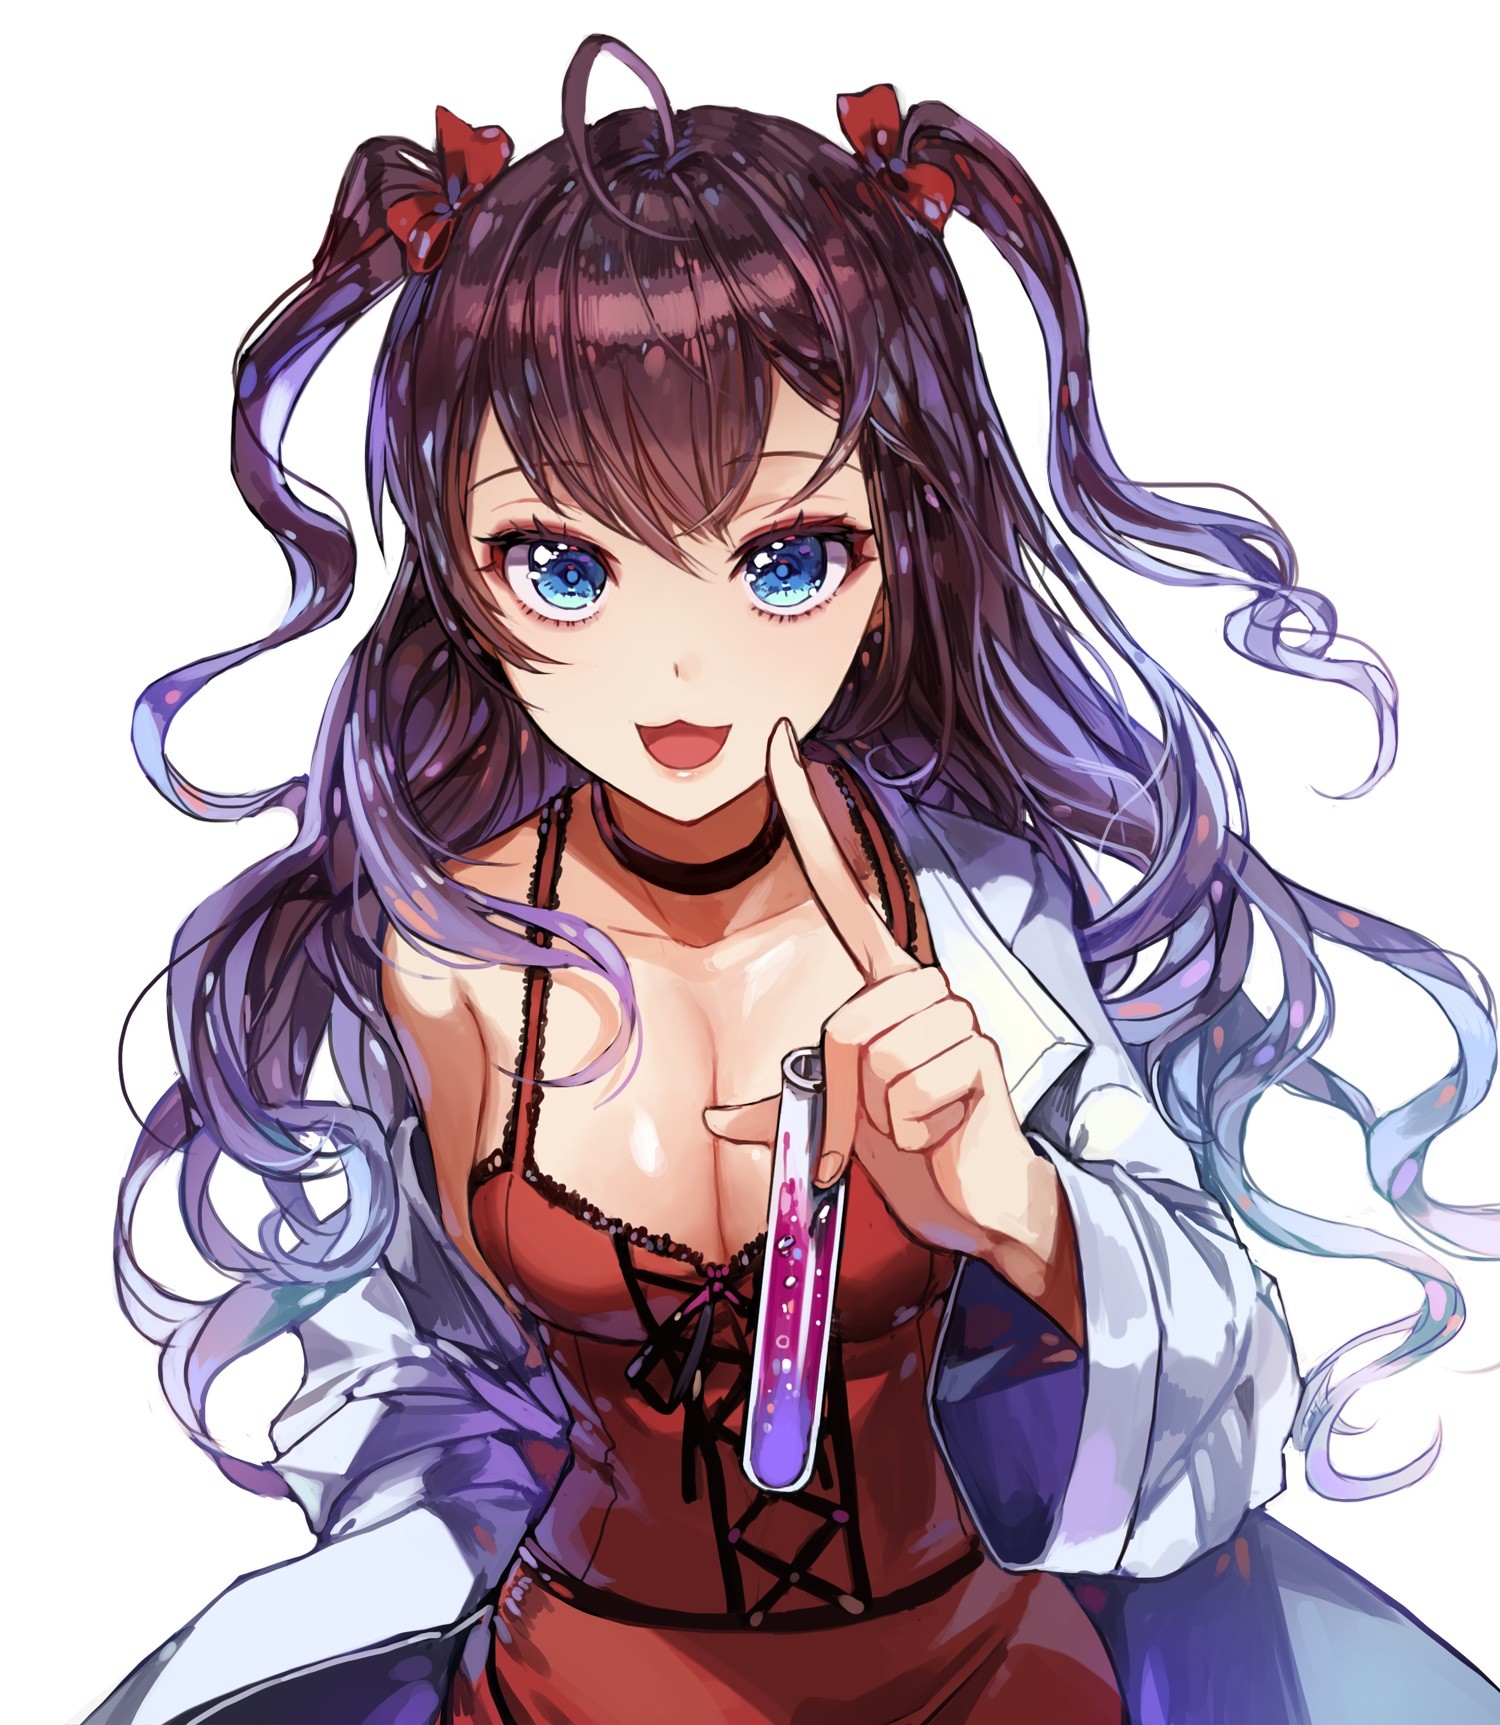 Anime 1500x1725 anime anime girls THE iDOLM@STER THE iDOLM@STER: Cinderella Girls Ichinose Shiki cleavage dress lab coats brunette blue eyes EB+ Pixiv open mouth